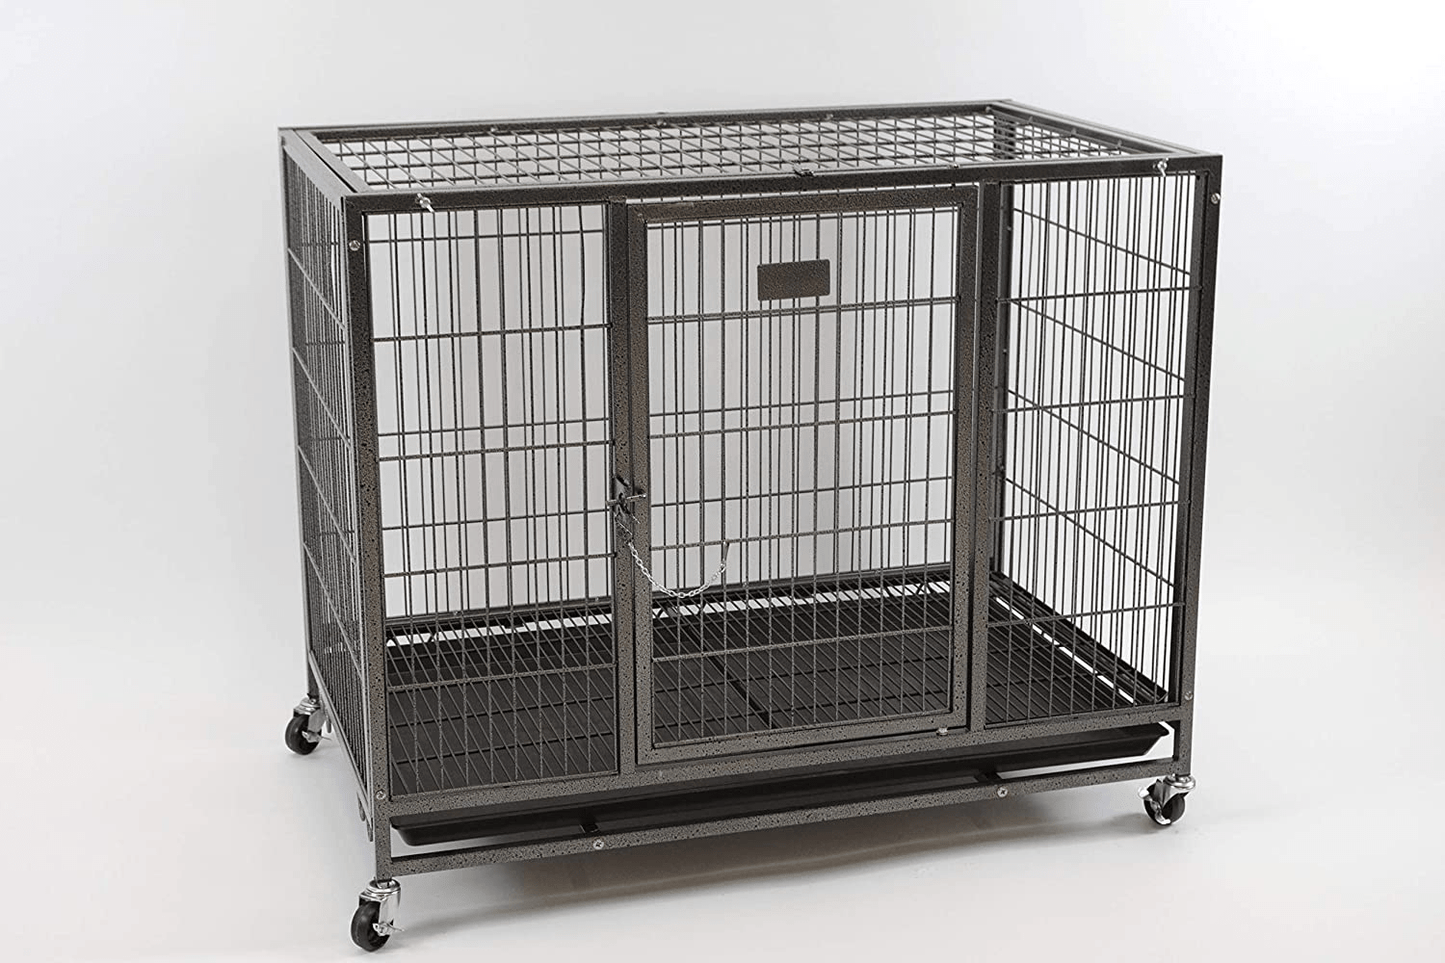 37" Homey Pet Heavy Duty Metal Open Top Cage W/ Floor Grid, Casters and Tray